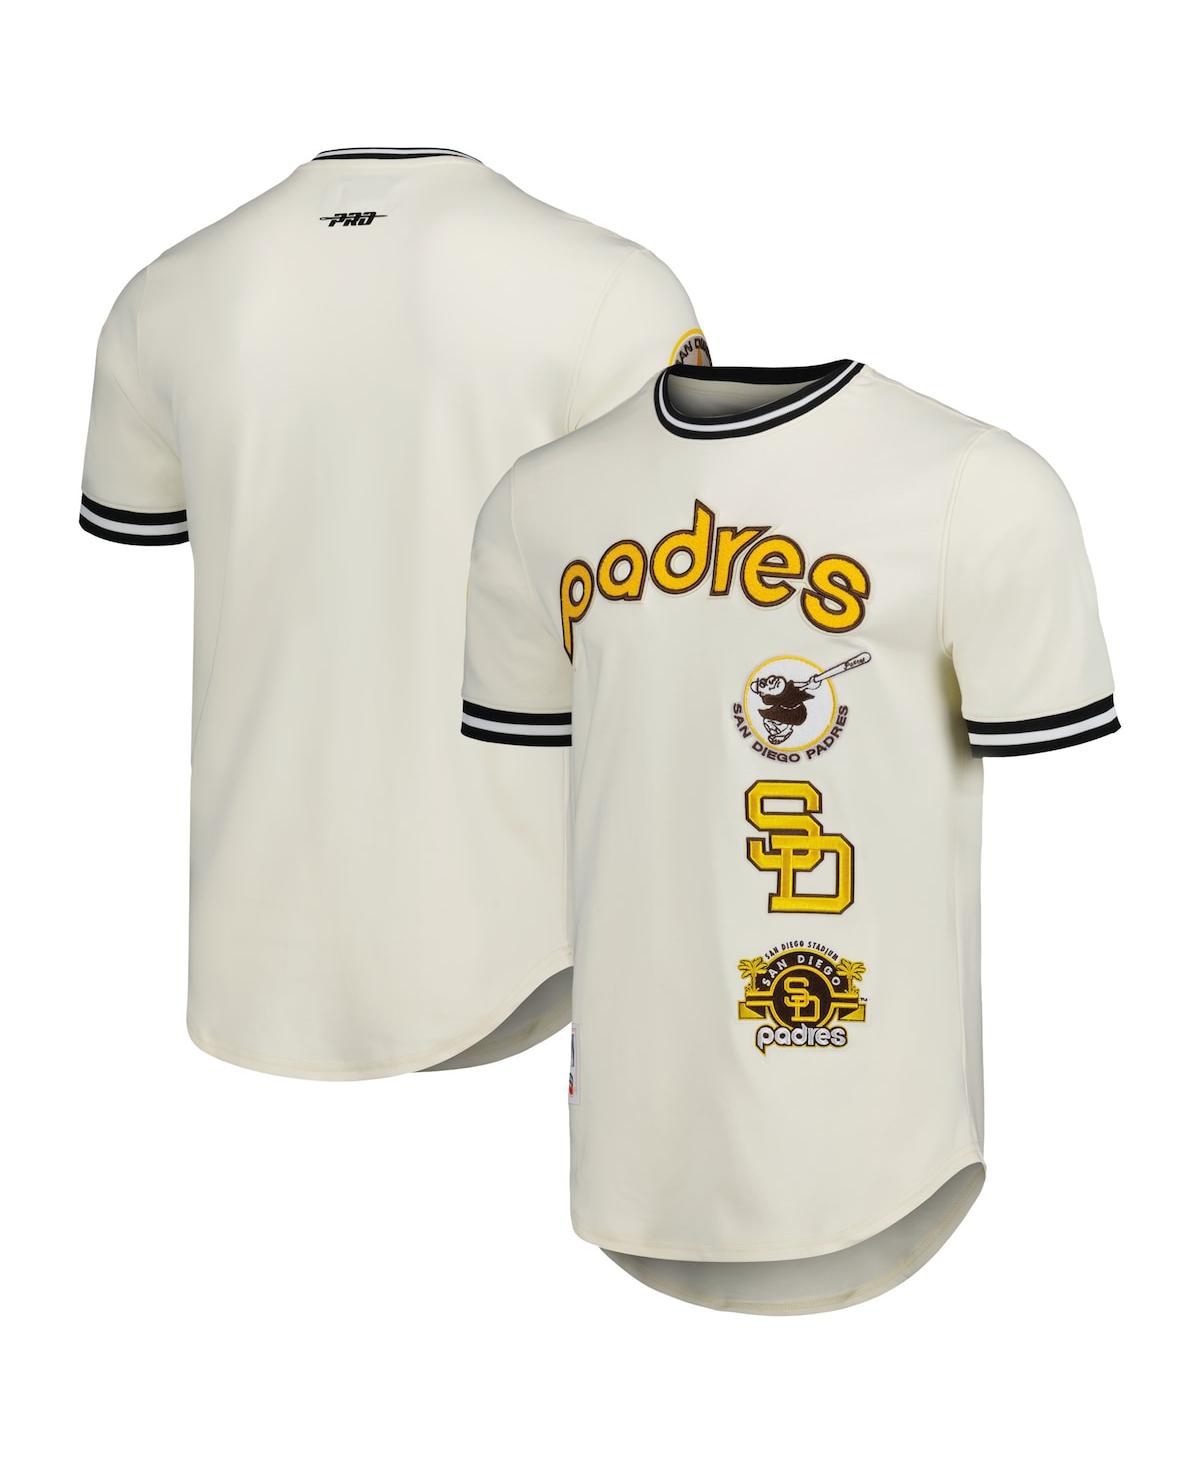 Men's Pro Standard Beige San Diego Padres Cooperstown Collection Retro Classic T-Shirt